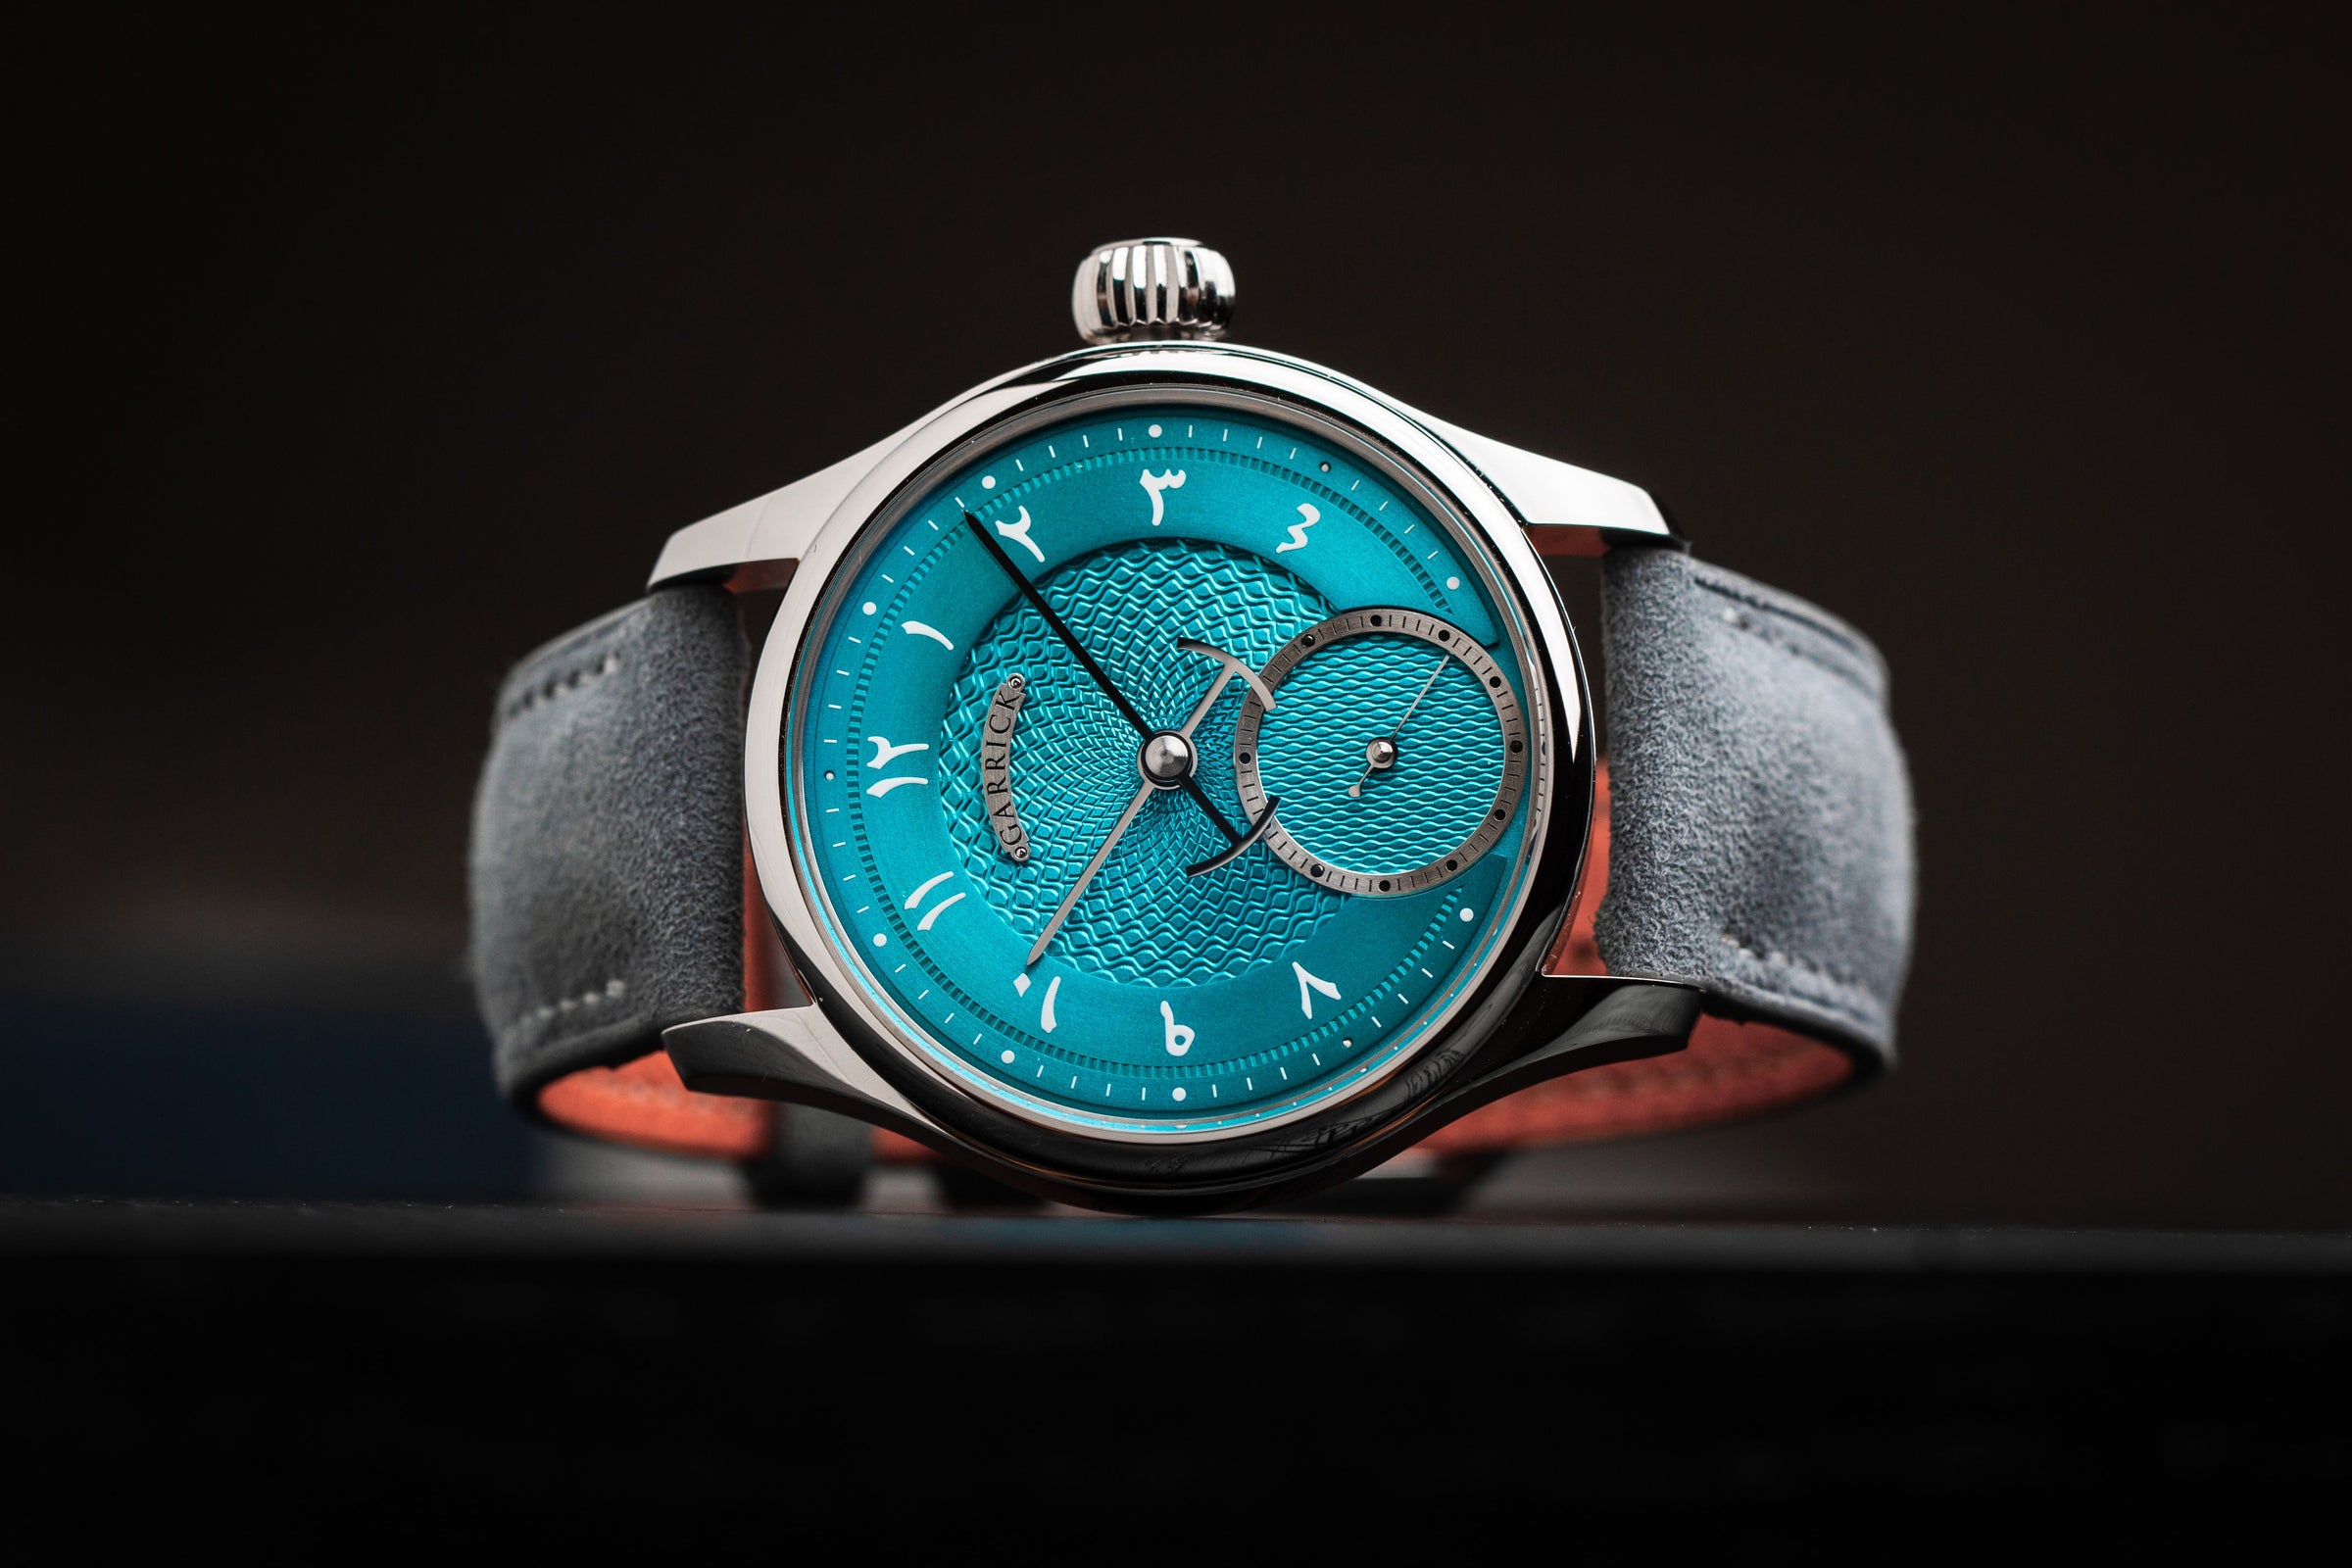 Bespoke British made S4 watch with blue guilloche dial and Arabic numerals